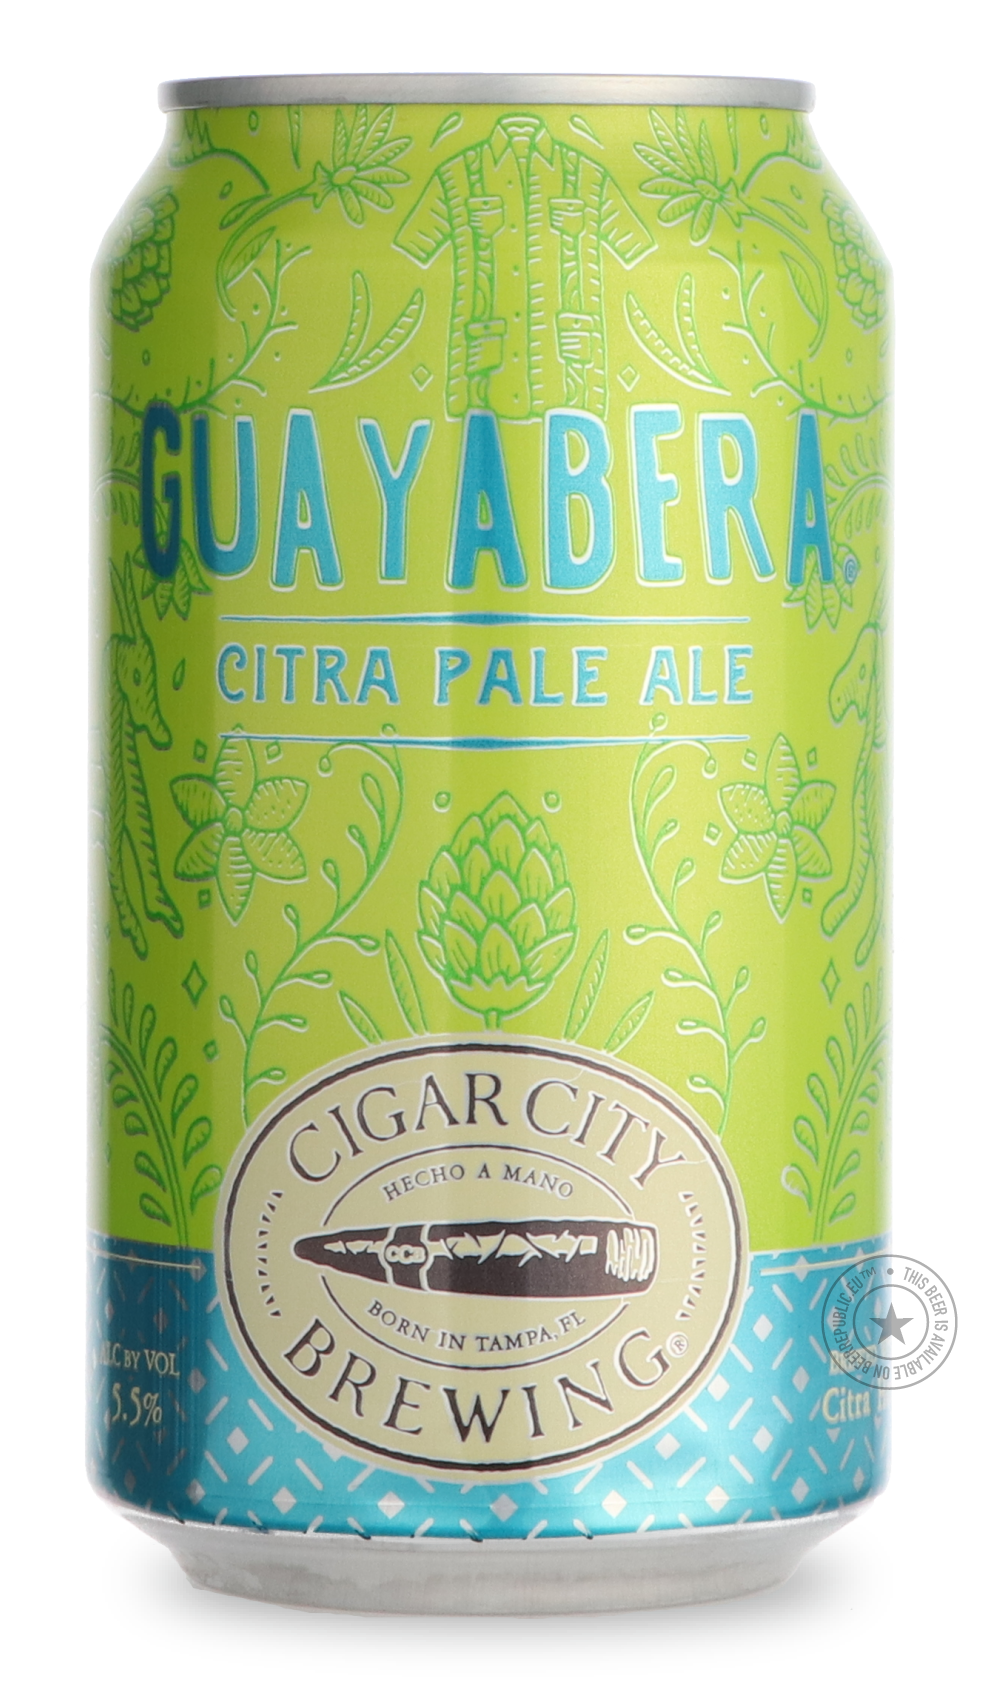 -Cigar City- Guayabera-Pale- Only @ Beer Republic - The best online beer store for American & Canadian craft beer - Buy beer online from the USA and Canada - Bier online kopen - Amerikaans bier kopen - Craft beer store - Craft beer kopen - Amerikanisch bier kaufen - Bier online kaufen - Acheter biere online - IPA - Stout - Porter - New England IPA - Hazy IPA - Imperial Stout - Barrel Aged - Barrel Aged Imperial Stout - Brown - Dark beer - Blond - Blonde - Pilsner - Lager - Wheat - Weizen - Amber - Barley Wi